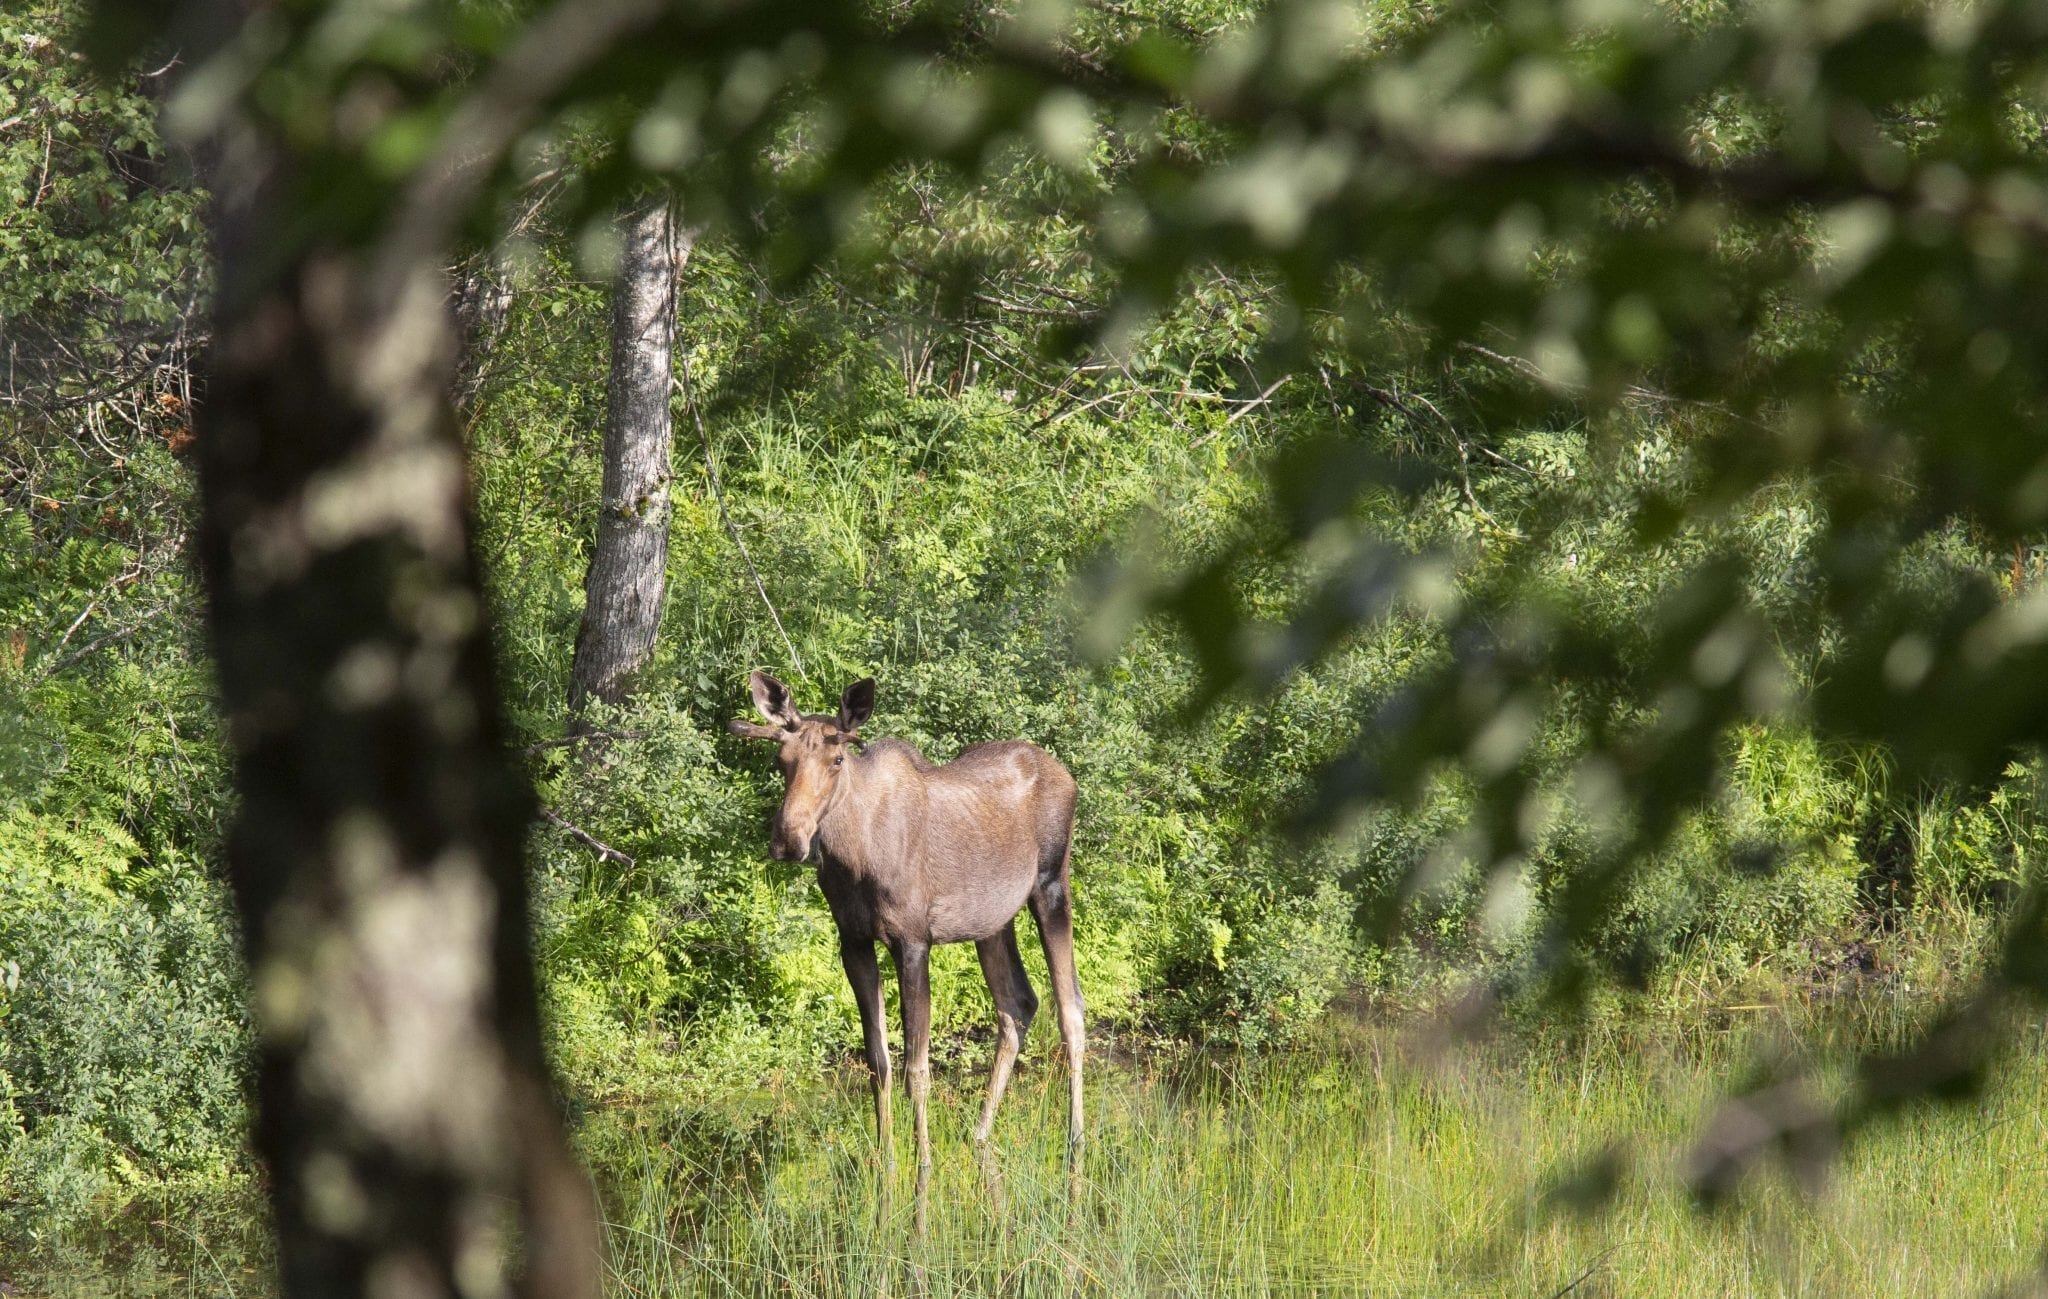 A moose hangs out near the Saranac River in July 2019.